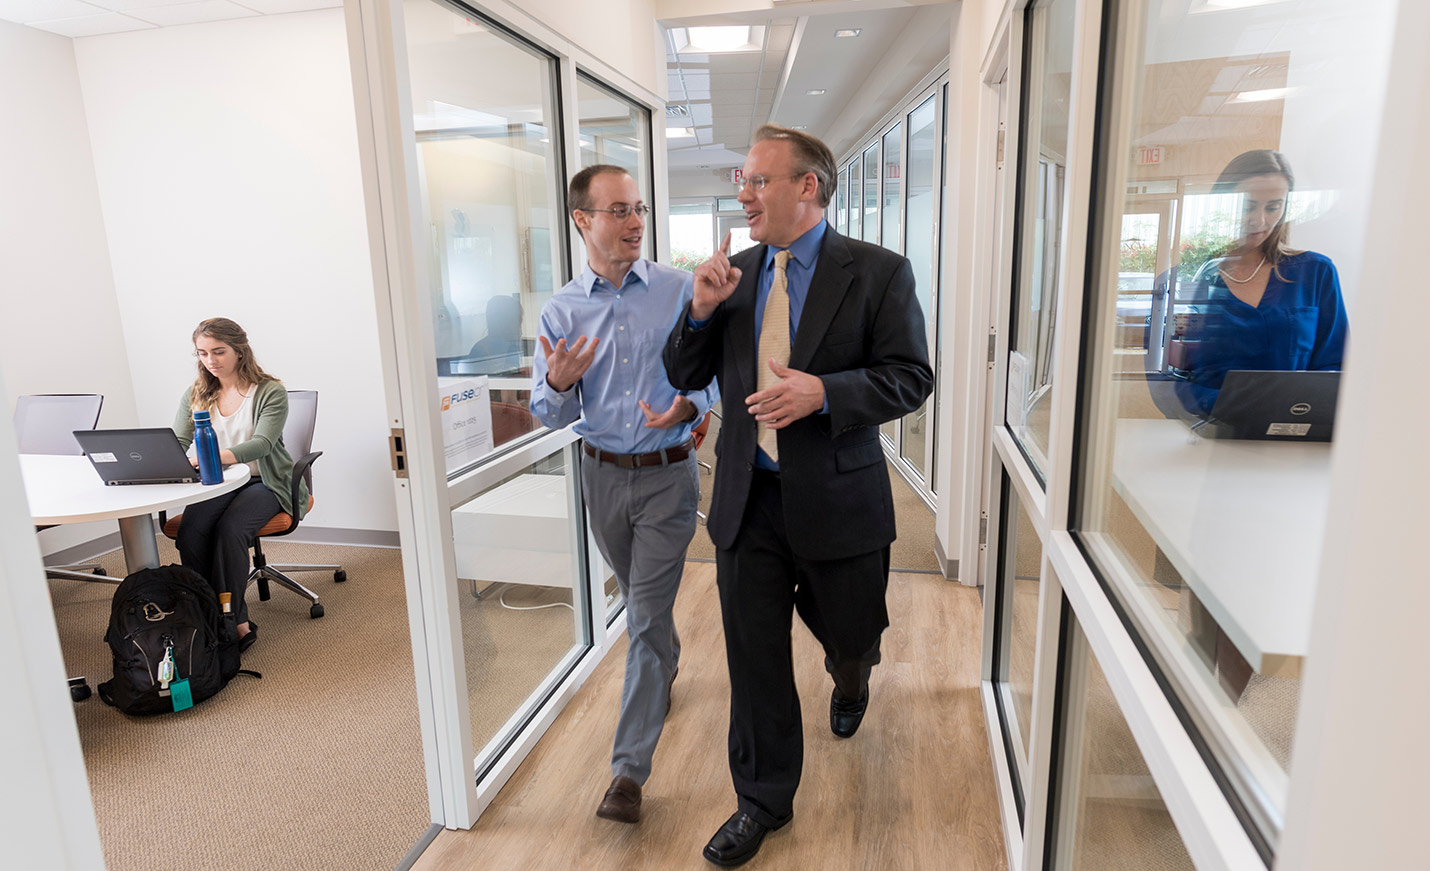 Two men walk down a hallway surrounded by glass-walled offices